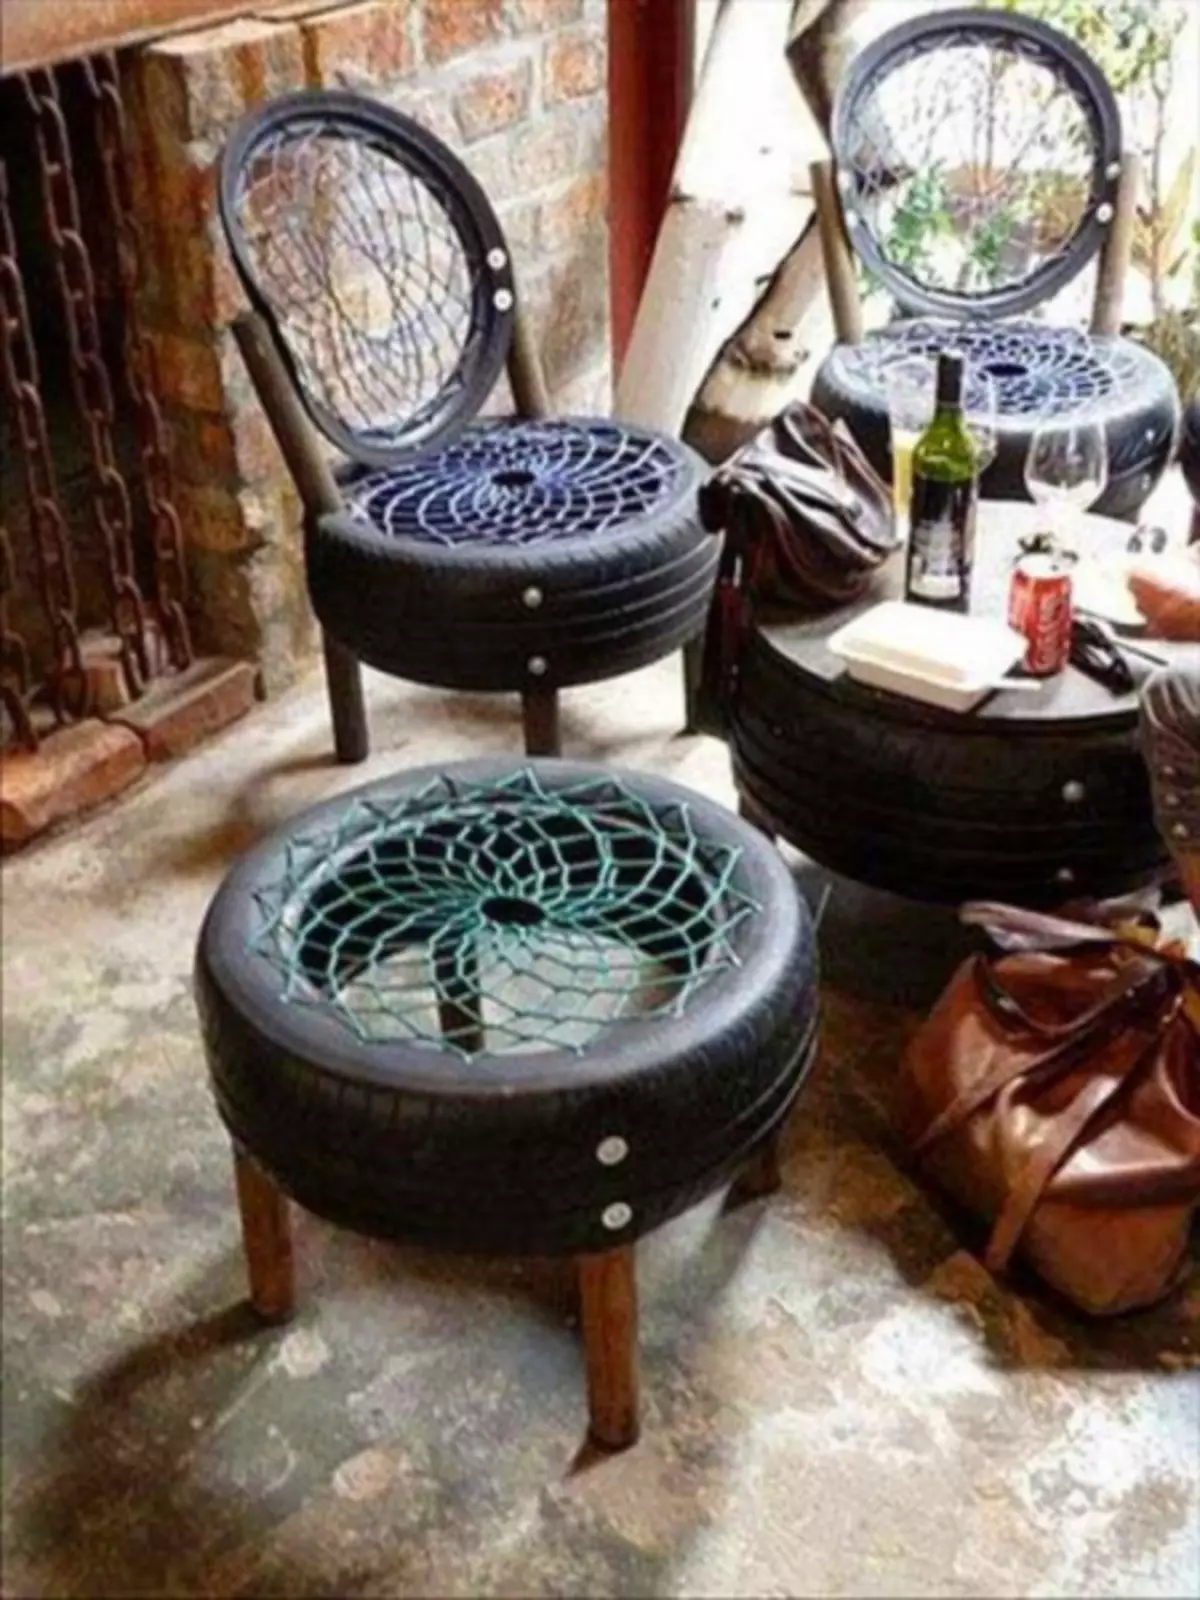 Furniture from tires (tires) with their own hands (39 photos)